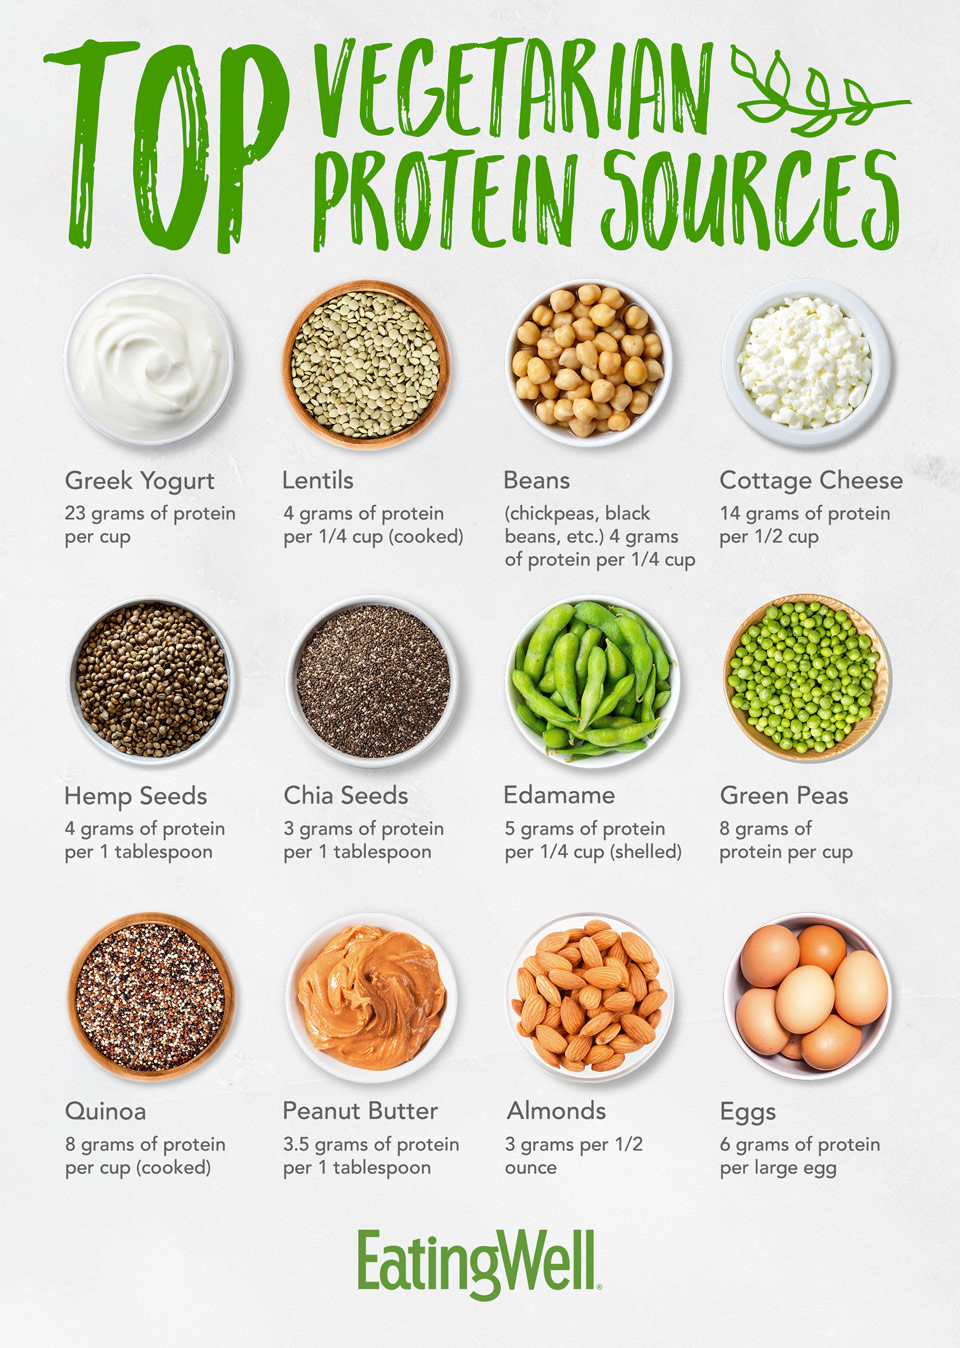 Best Vegetarian Protein Sources
 Top Ve arian Protein Sources EatingWell